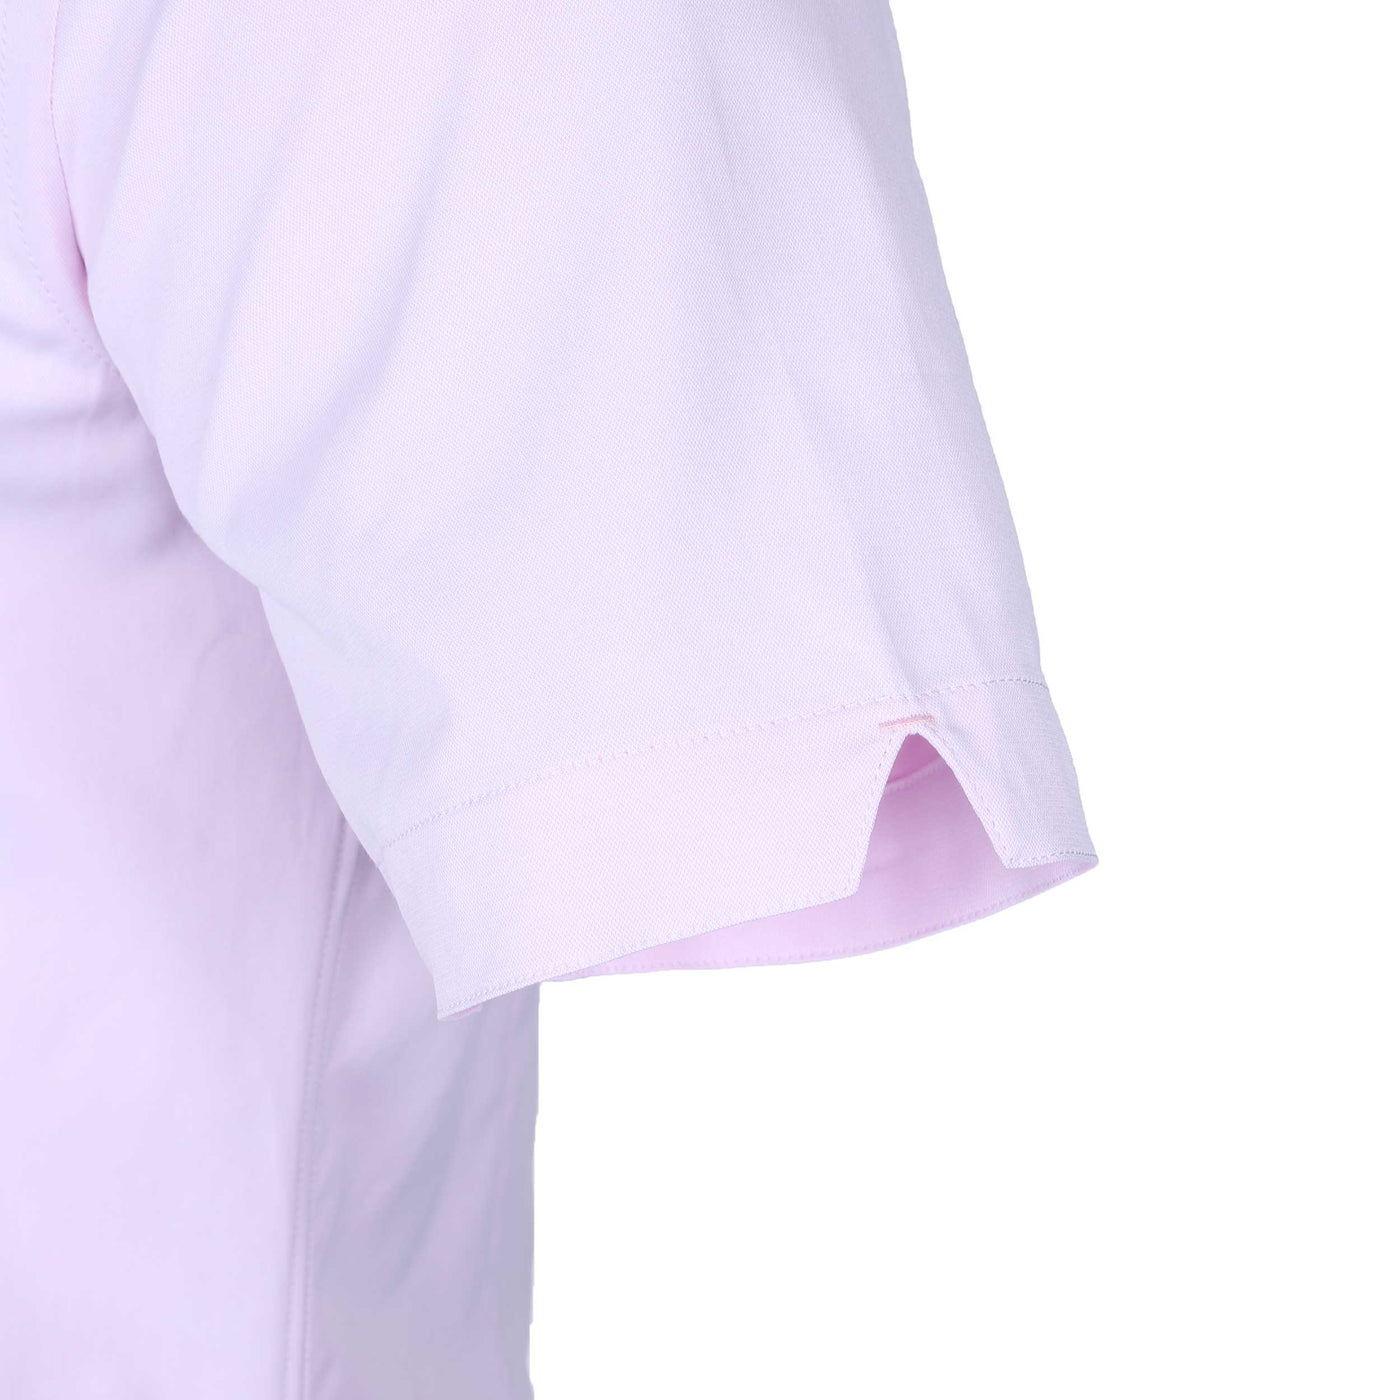 Remus Uomo 2 Way Stretch SS Shirt in Pink Sleeve